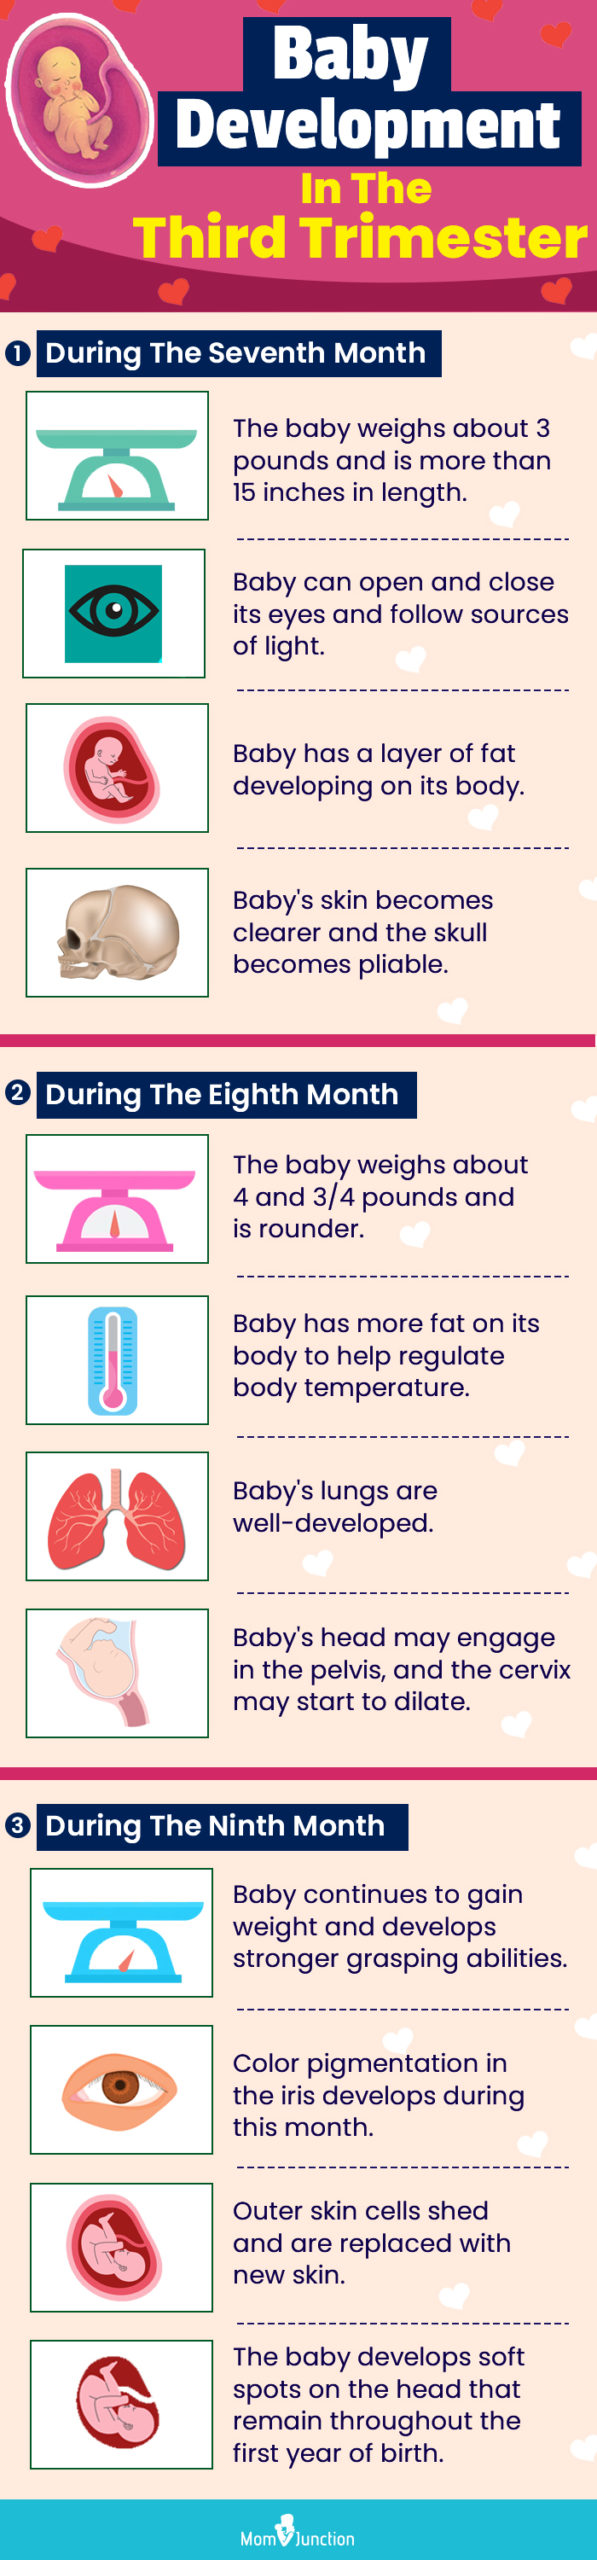 baby development in the third trimester (infographic)